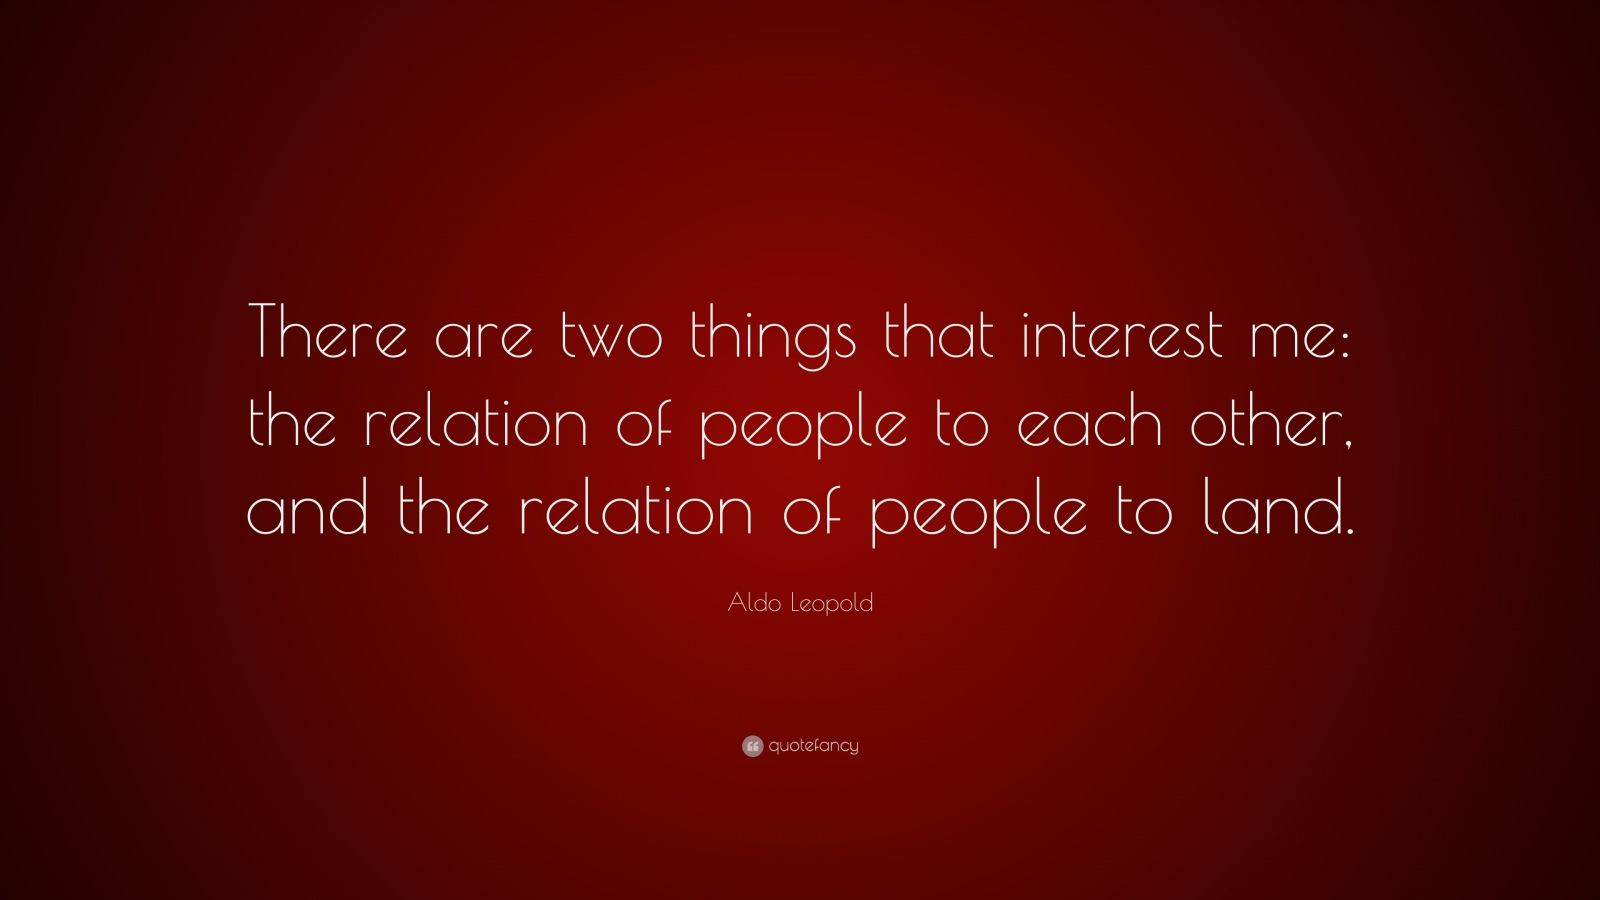 aldo-leopold-quote-there-are-two-things-that-interest-me-the